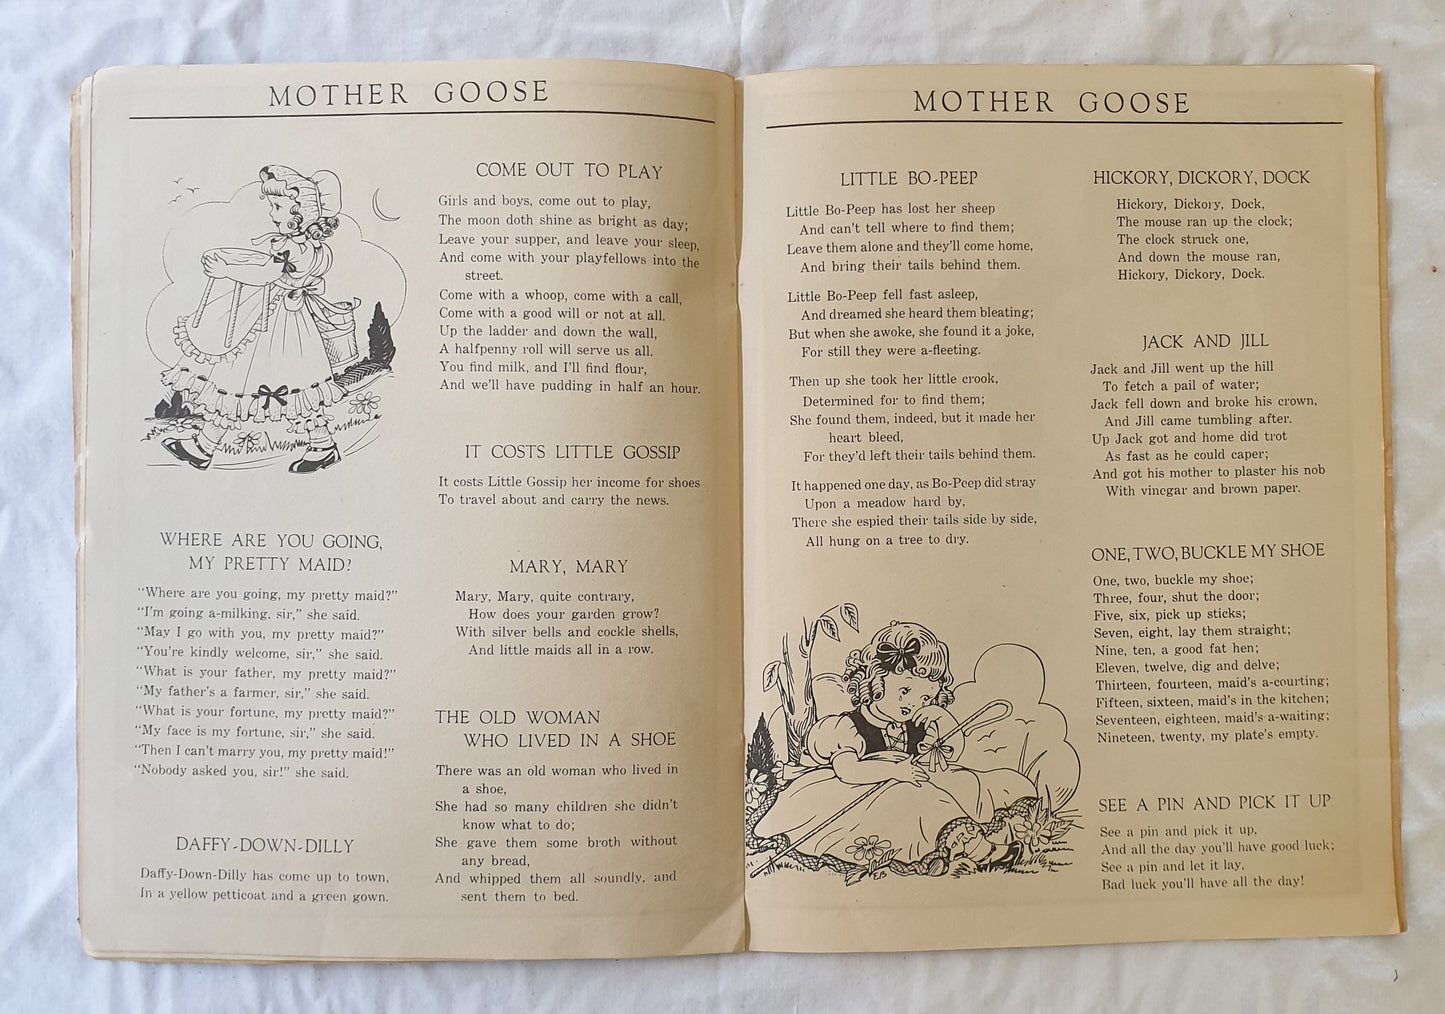 Mother Goose Illustrated by E. Buchanan